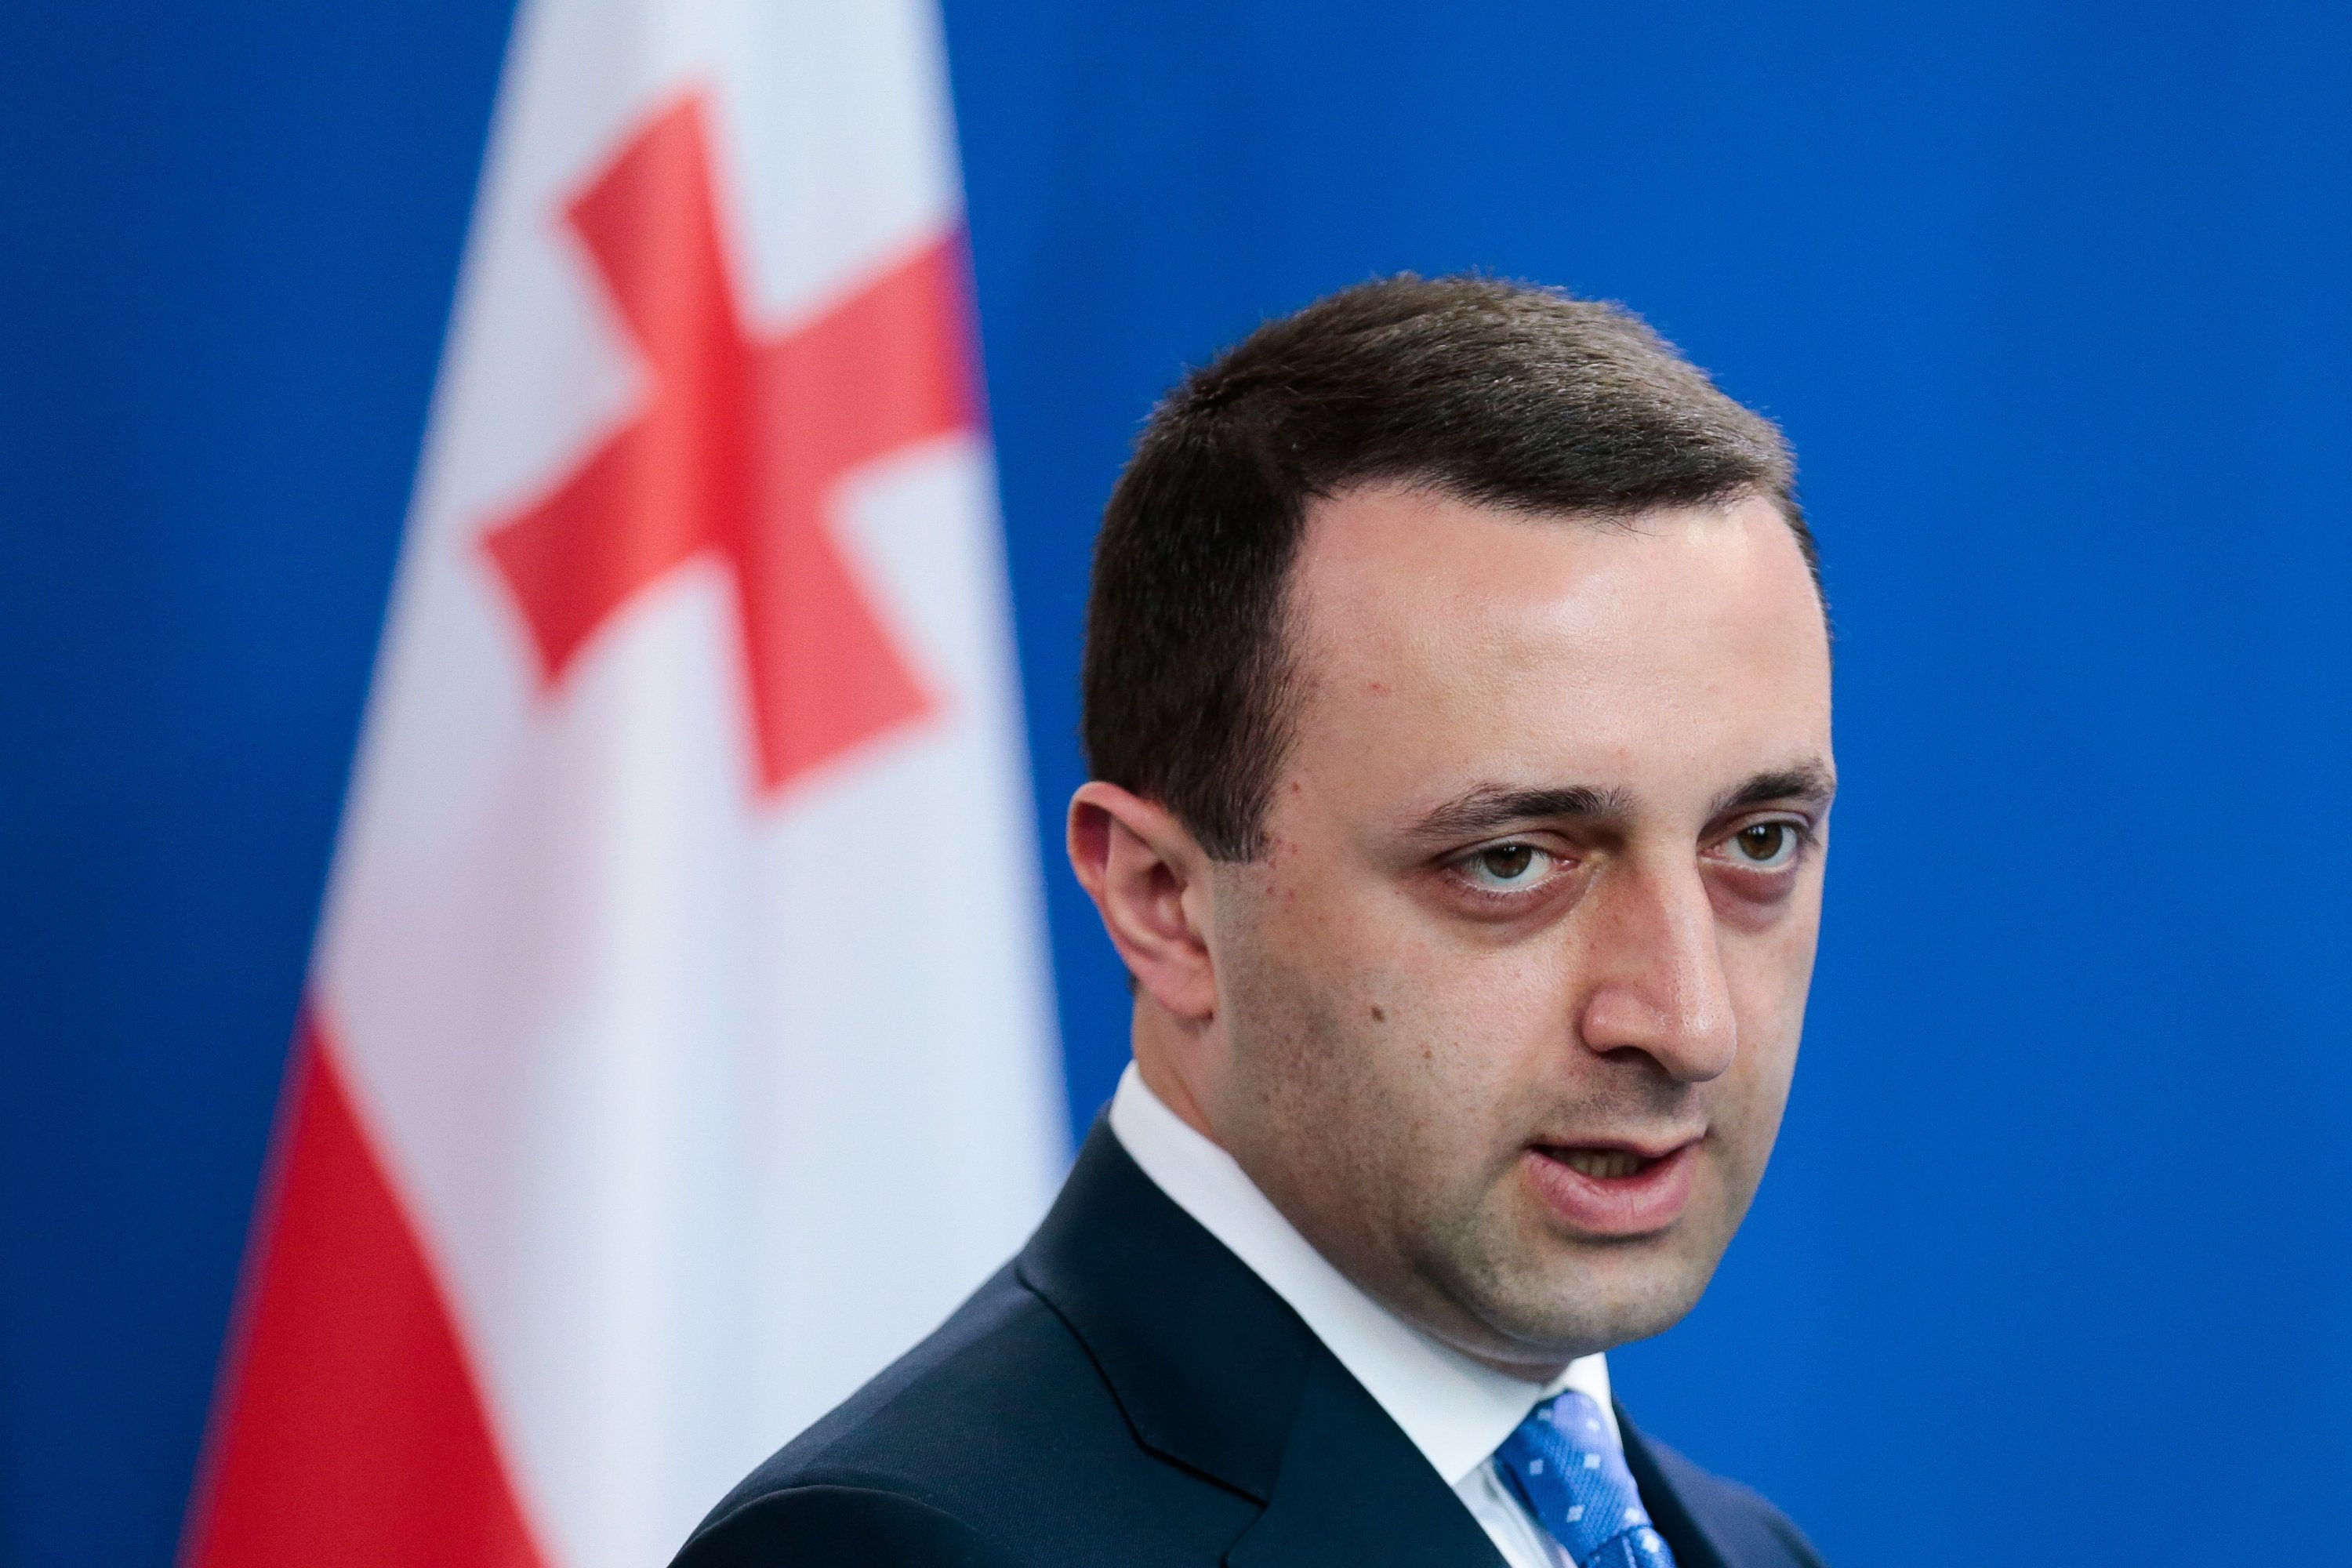 Top-ranking Georgian officials, including PM Irakli Garibashvili (pictured) and President Salome Zourabichvili, have expressed concern that the ongoing situation in eastern Ukraine “repeats the scenario” that led to Russia's occupation of 20% of Georgia back in 2008.